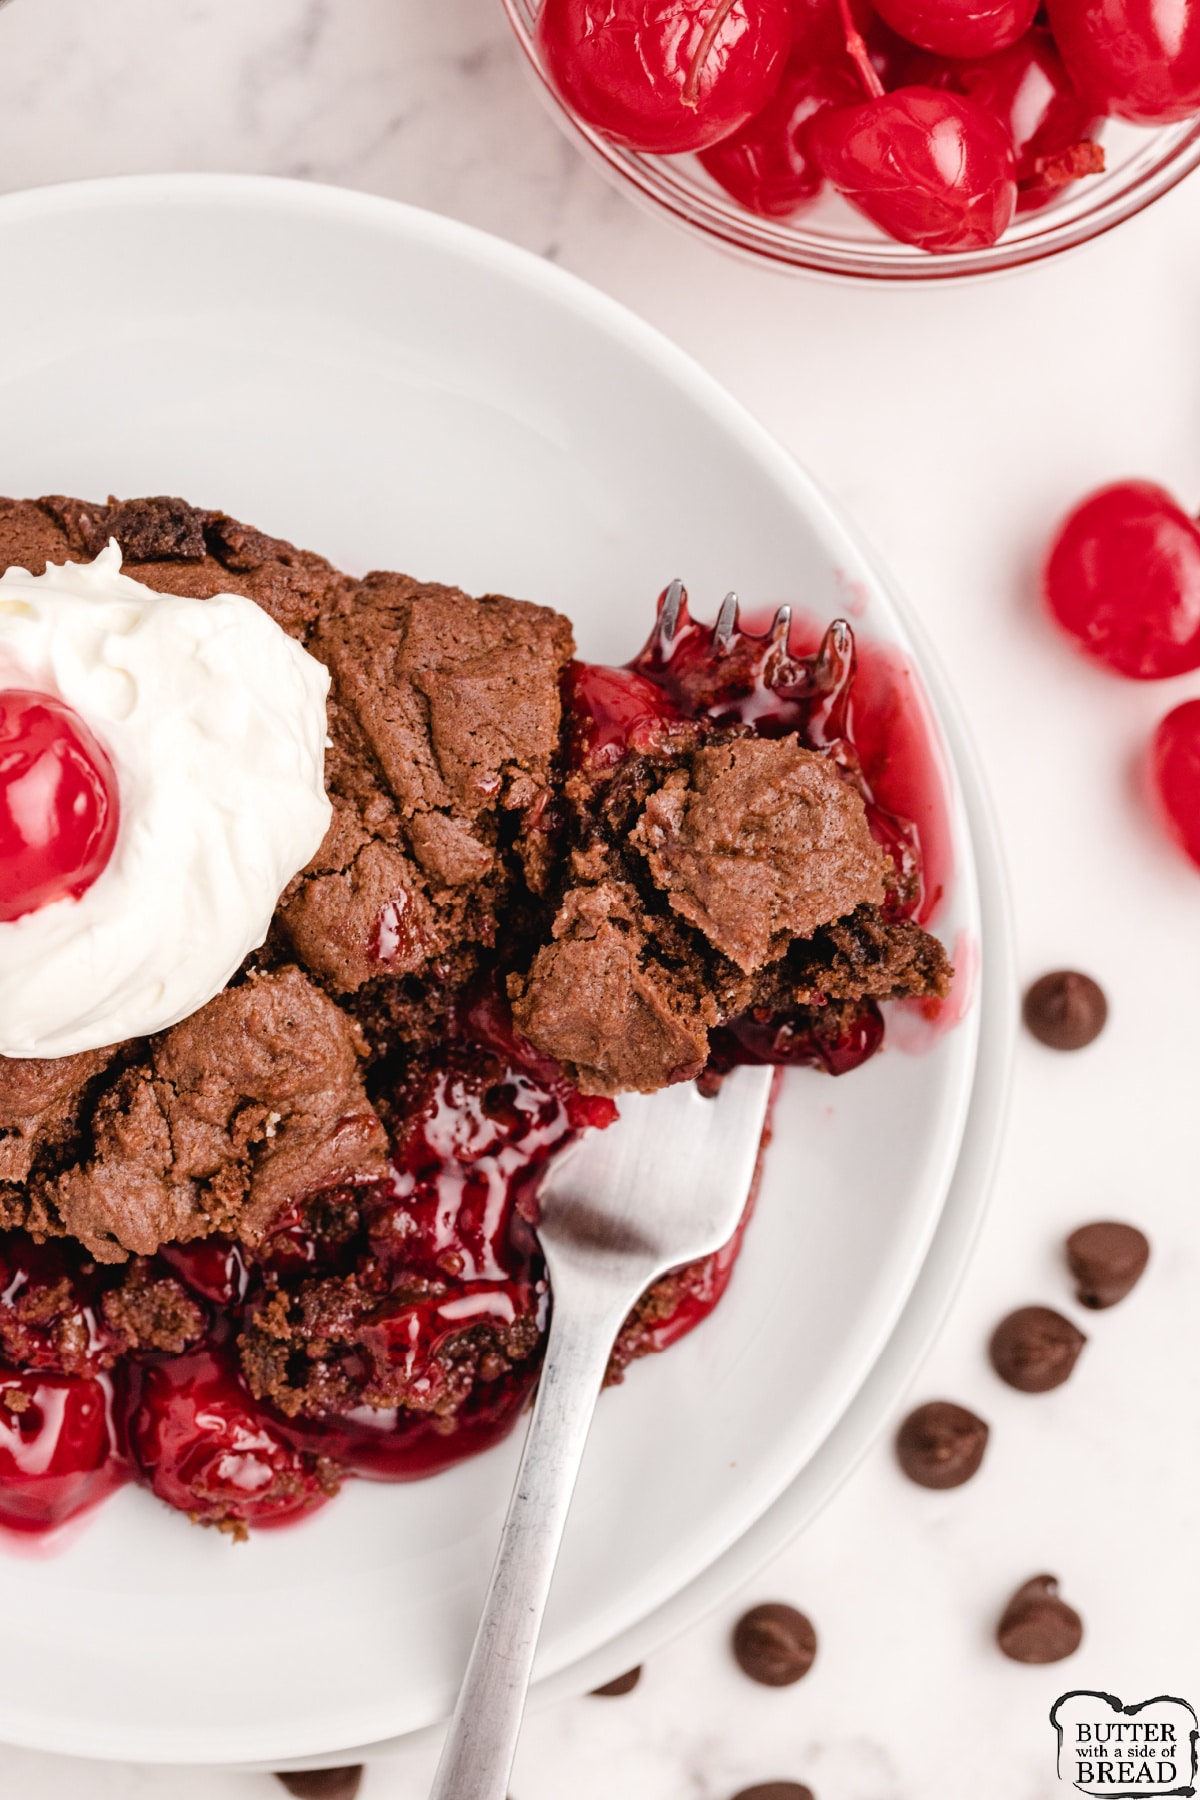 Cherry Cobbler with a chocolate crust